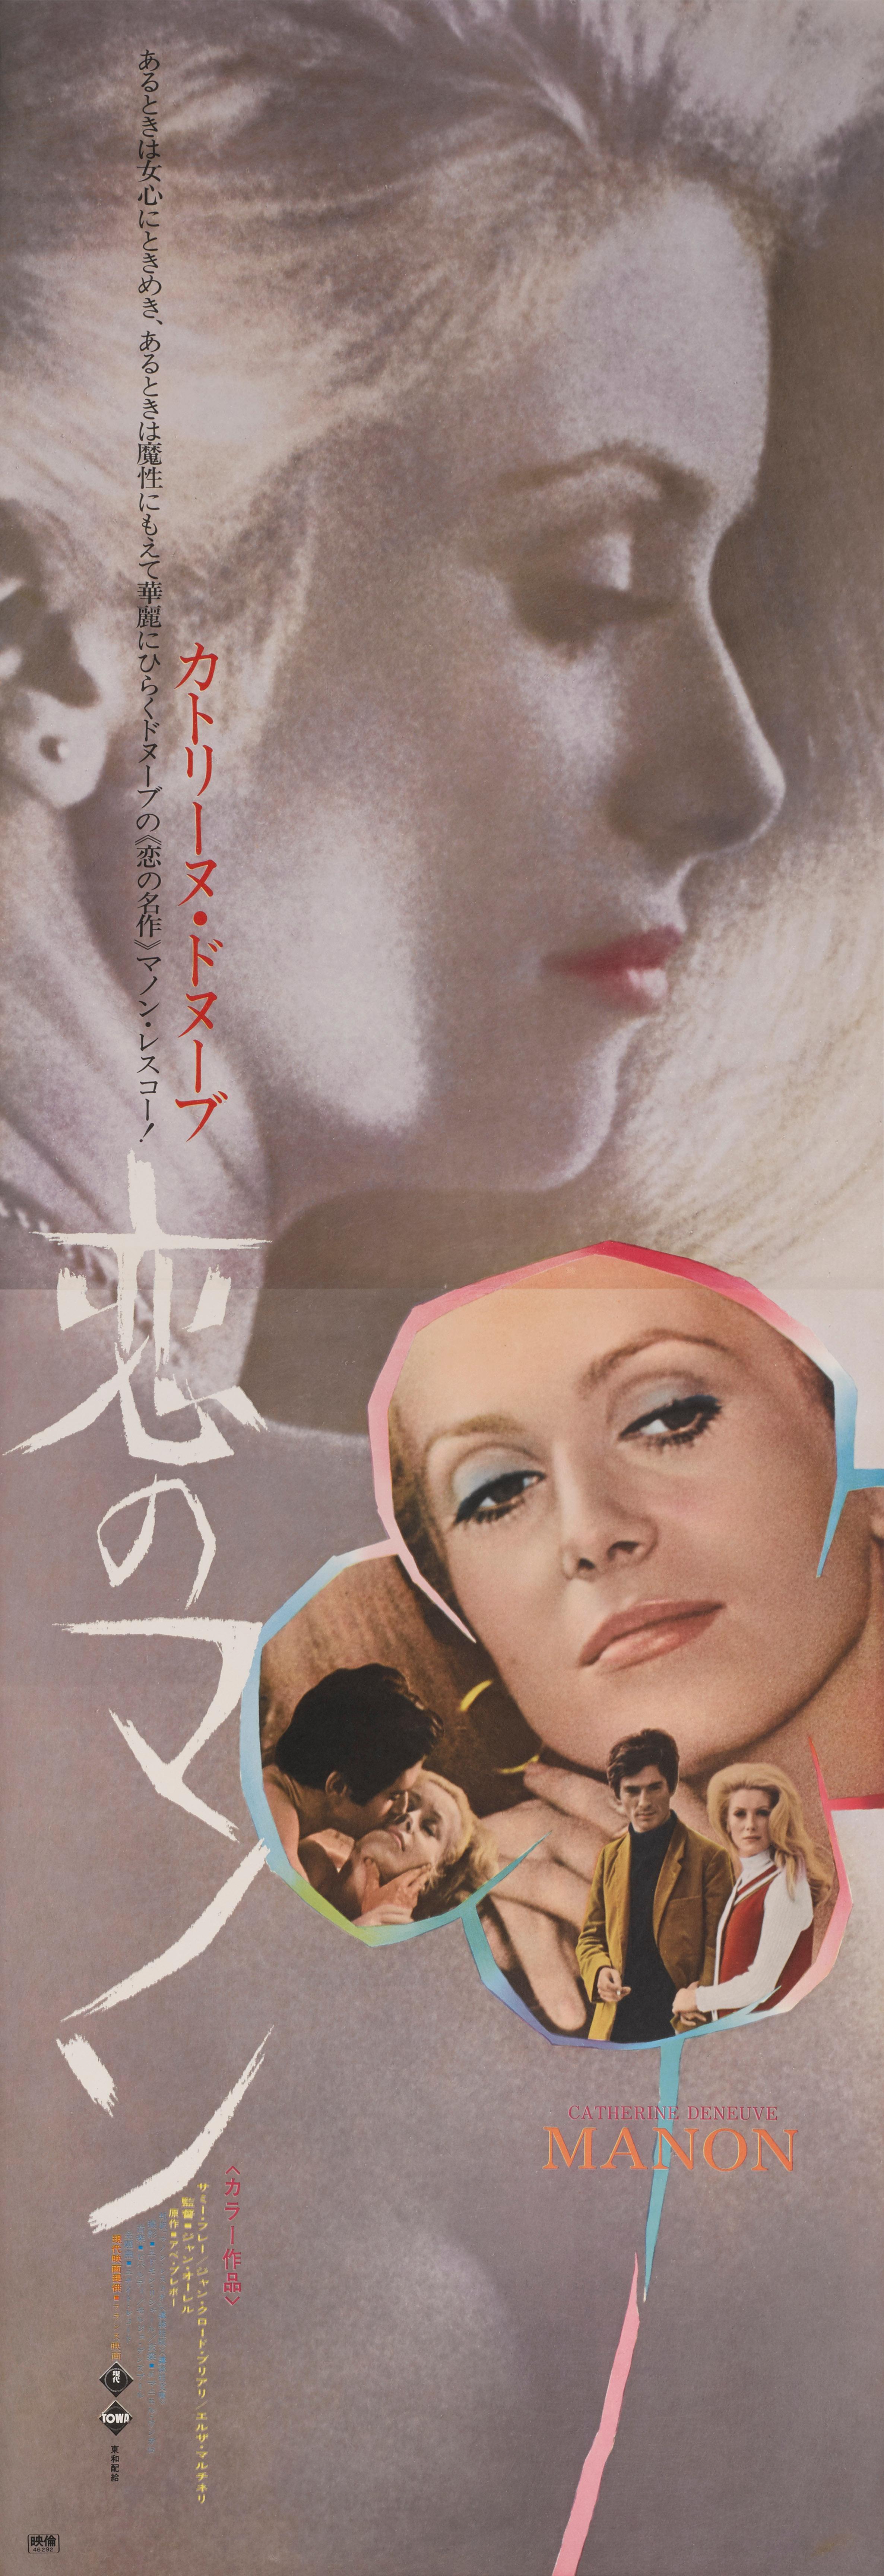 Original Japanese film poster for Jane Aurel's 1968 drama starring Catherine Deneuve, Jean Claude Brialy
The poster was printed in two sheets and is now conservation Linen backed and in excellent condition and the colors are very bright. The poster